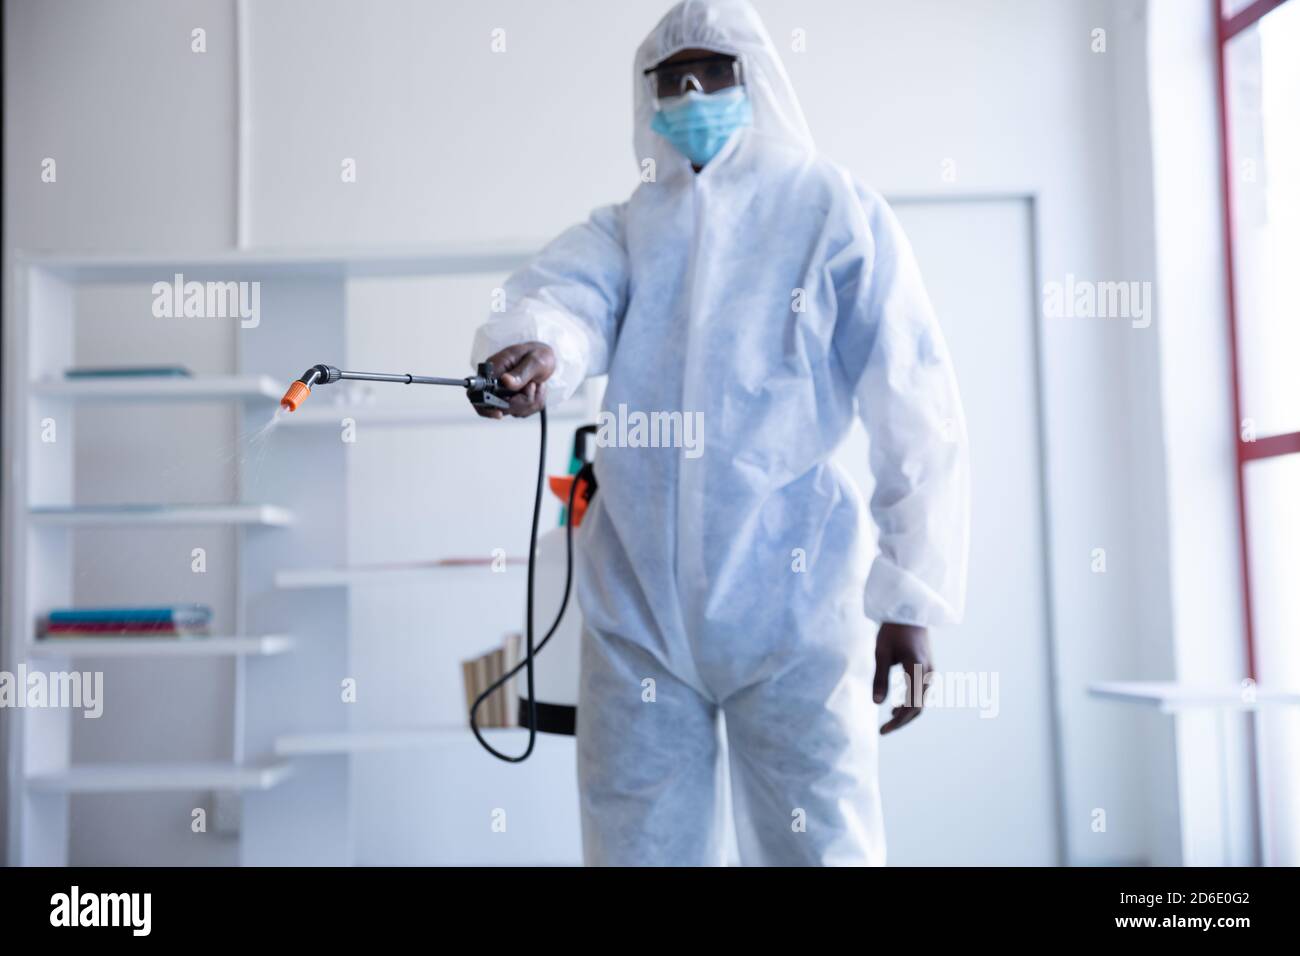 Health worker wearing protective clothes cleaning using disinfectant Stock Photo